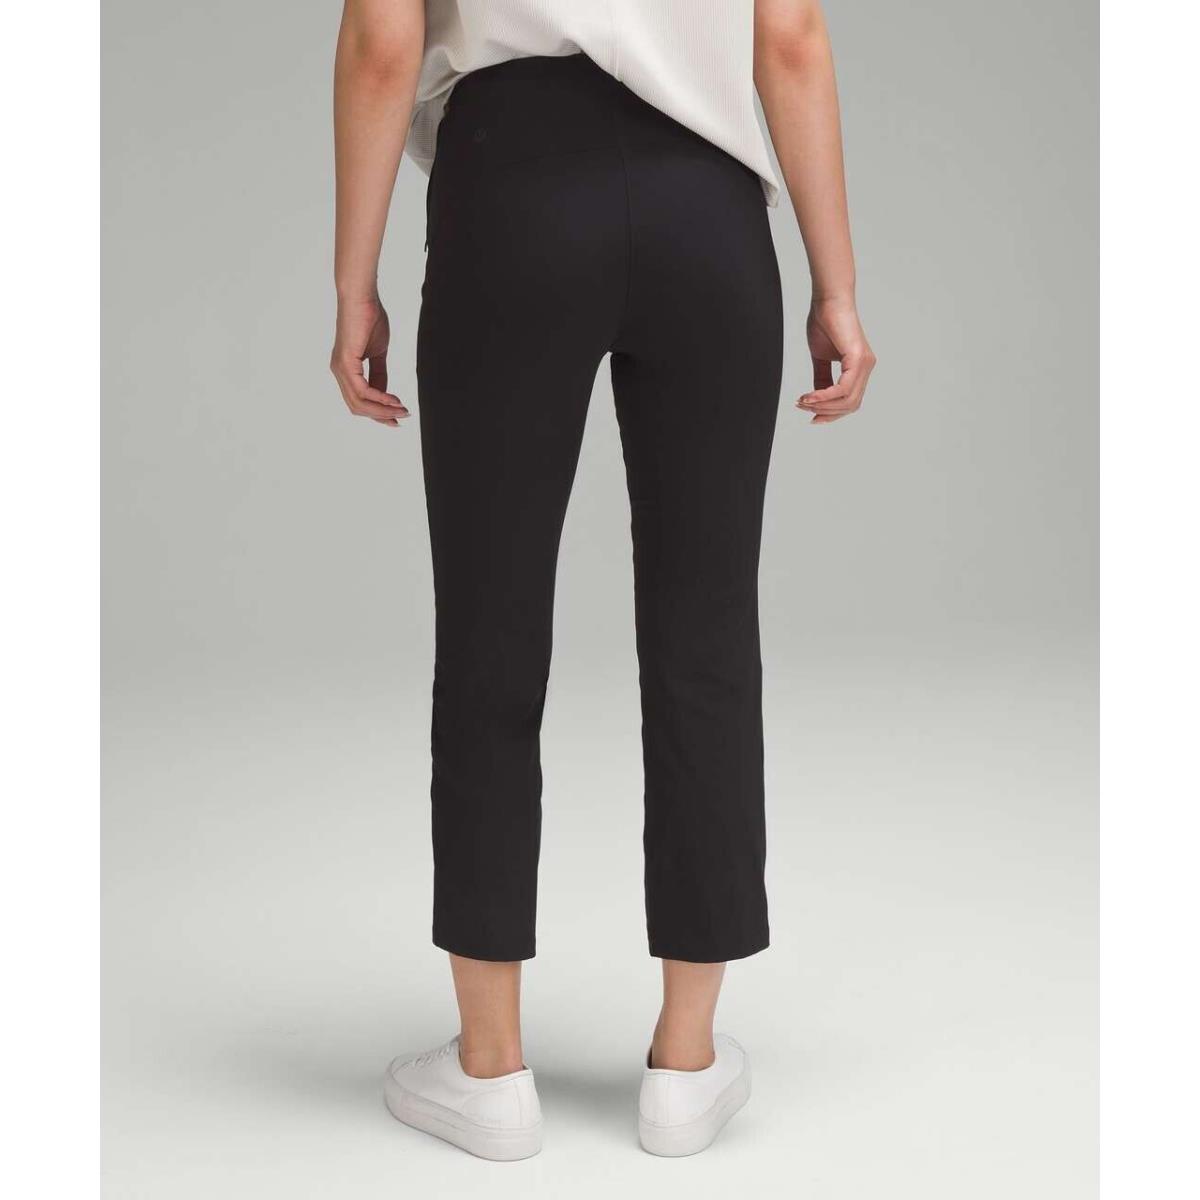 Lululemon Smooth Fit Pull-on High-rise Cropped Pants Black Size 12